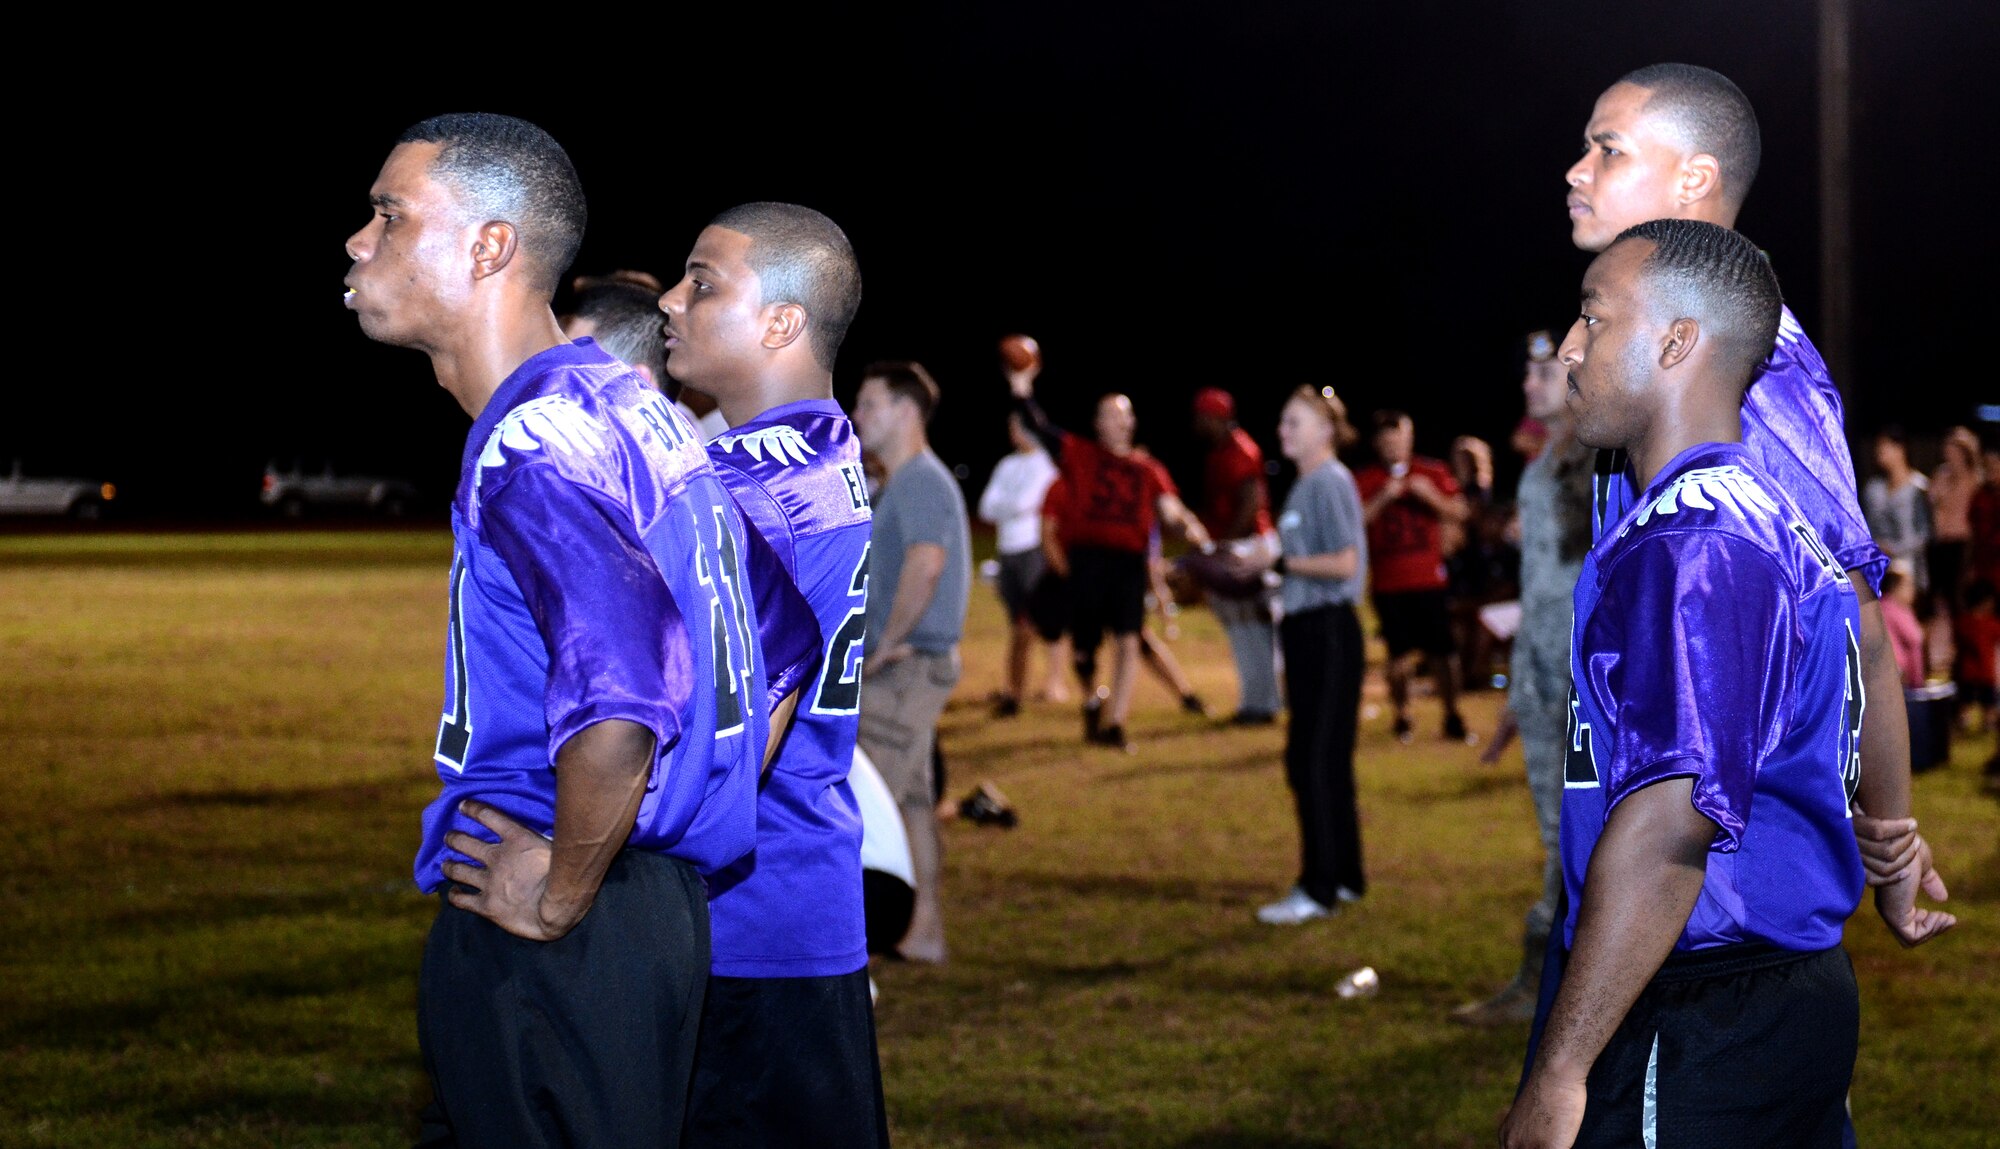 Players from the 36th Security Forces Squadron watch from the sidelines during an intramural flag football playoff game between 36th SFS and 736th Security Forces Squadron on Andersen Air Force Base, Guam, Jan. 14, 2014. The championship game is scheduled for Jan. 17 at 6 p.m. (U.S. Air Force photo by Airman 1st Class Mariah Haddenham/Released)